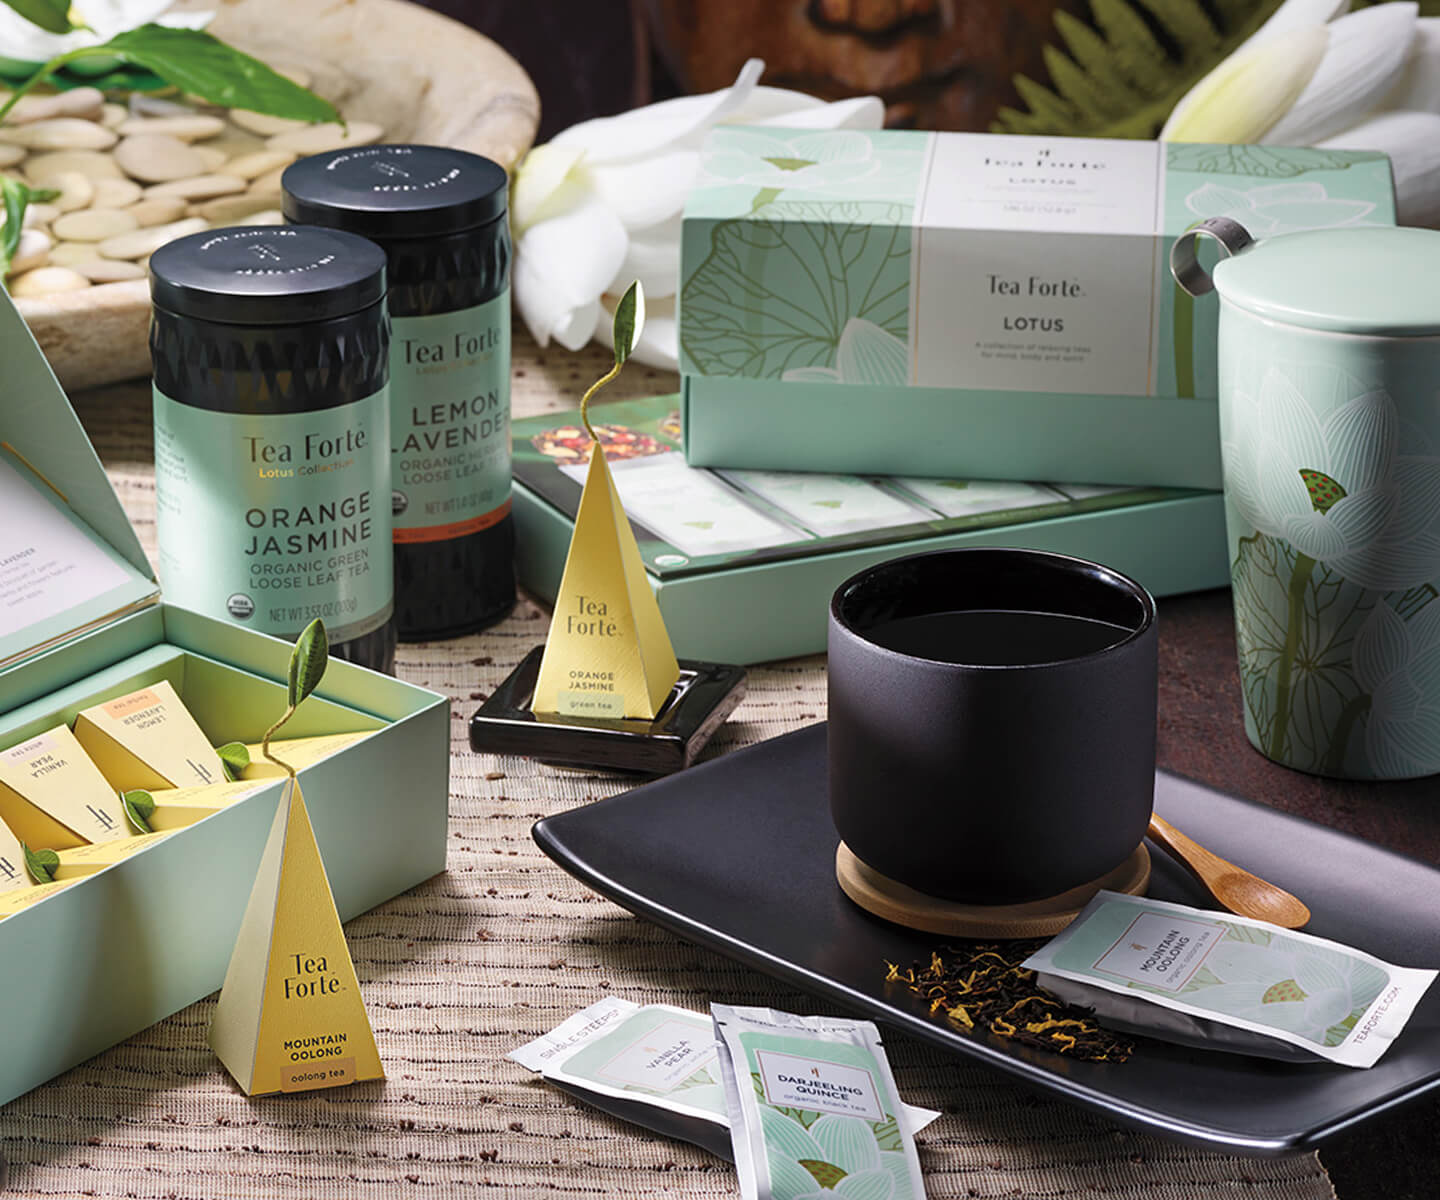 The Lotus Tea Collection with infusers, cups and tea